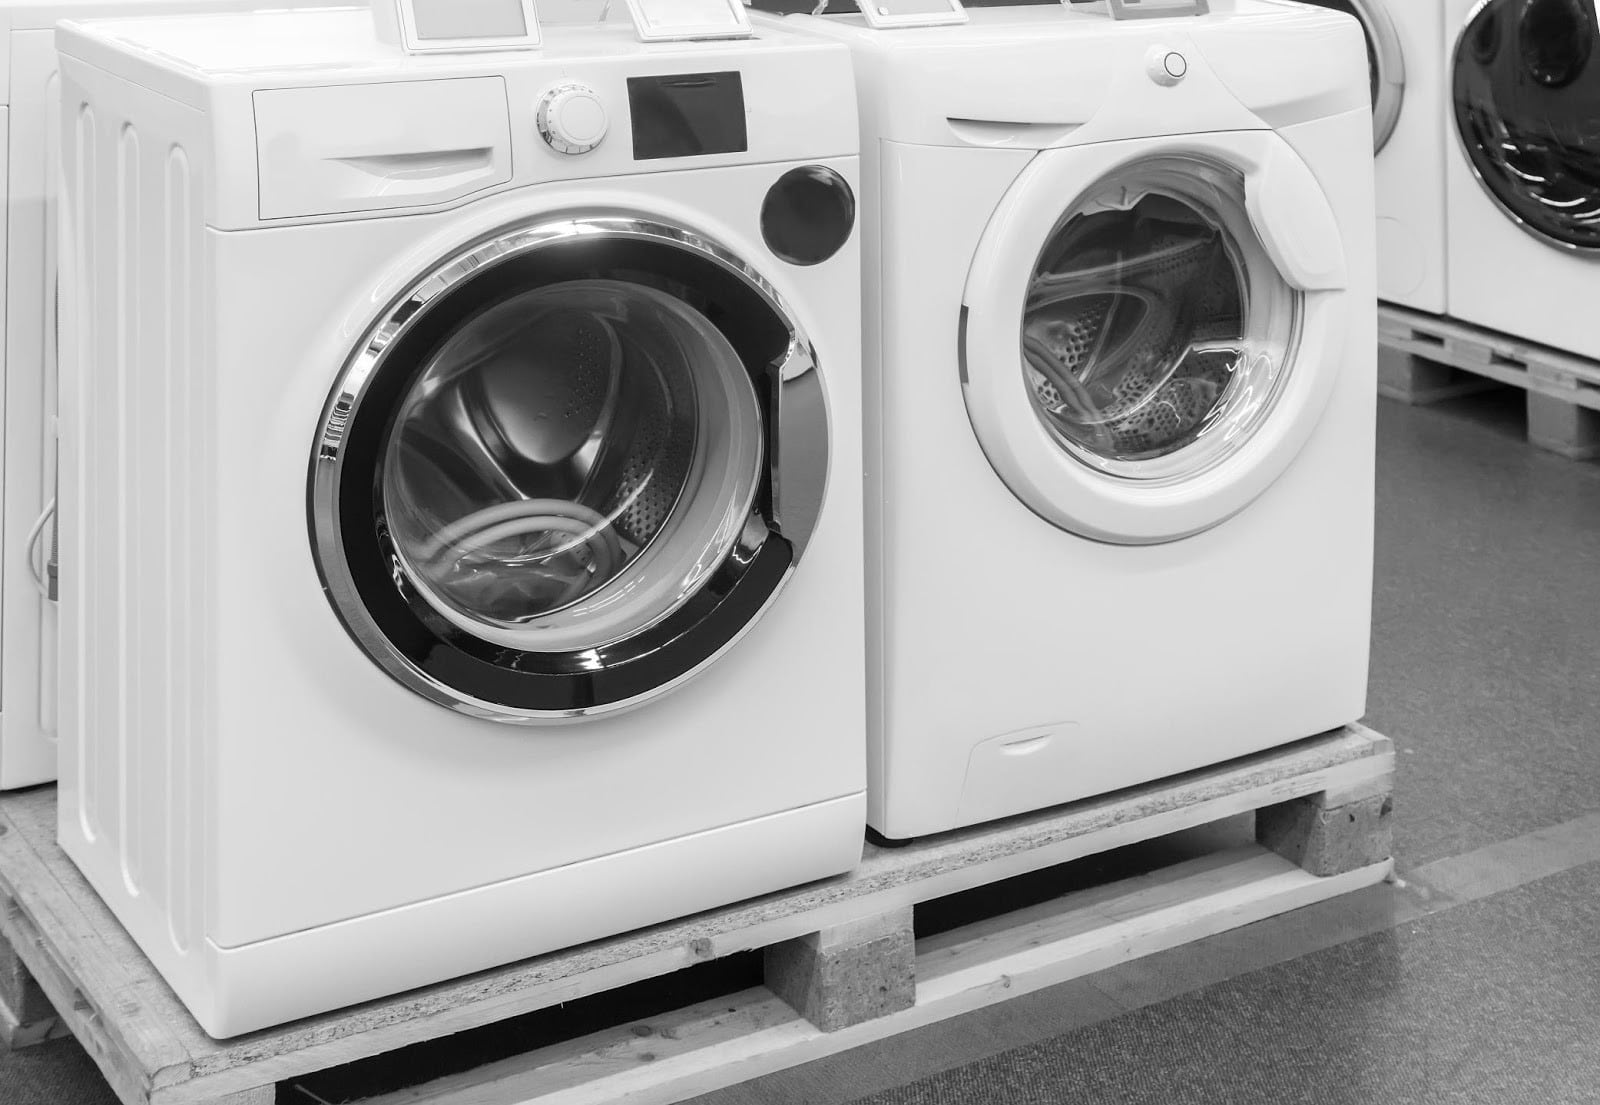 how to move a washer and dryer